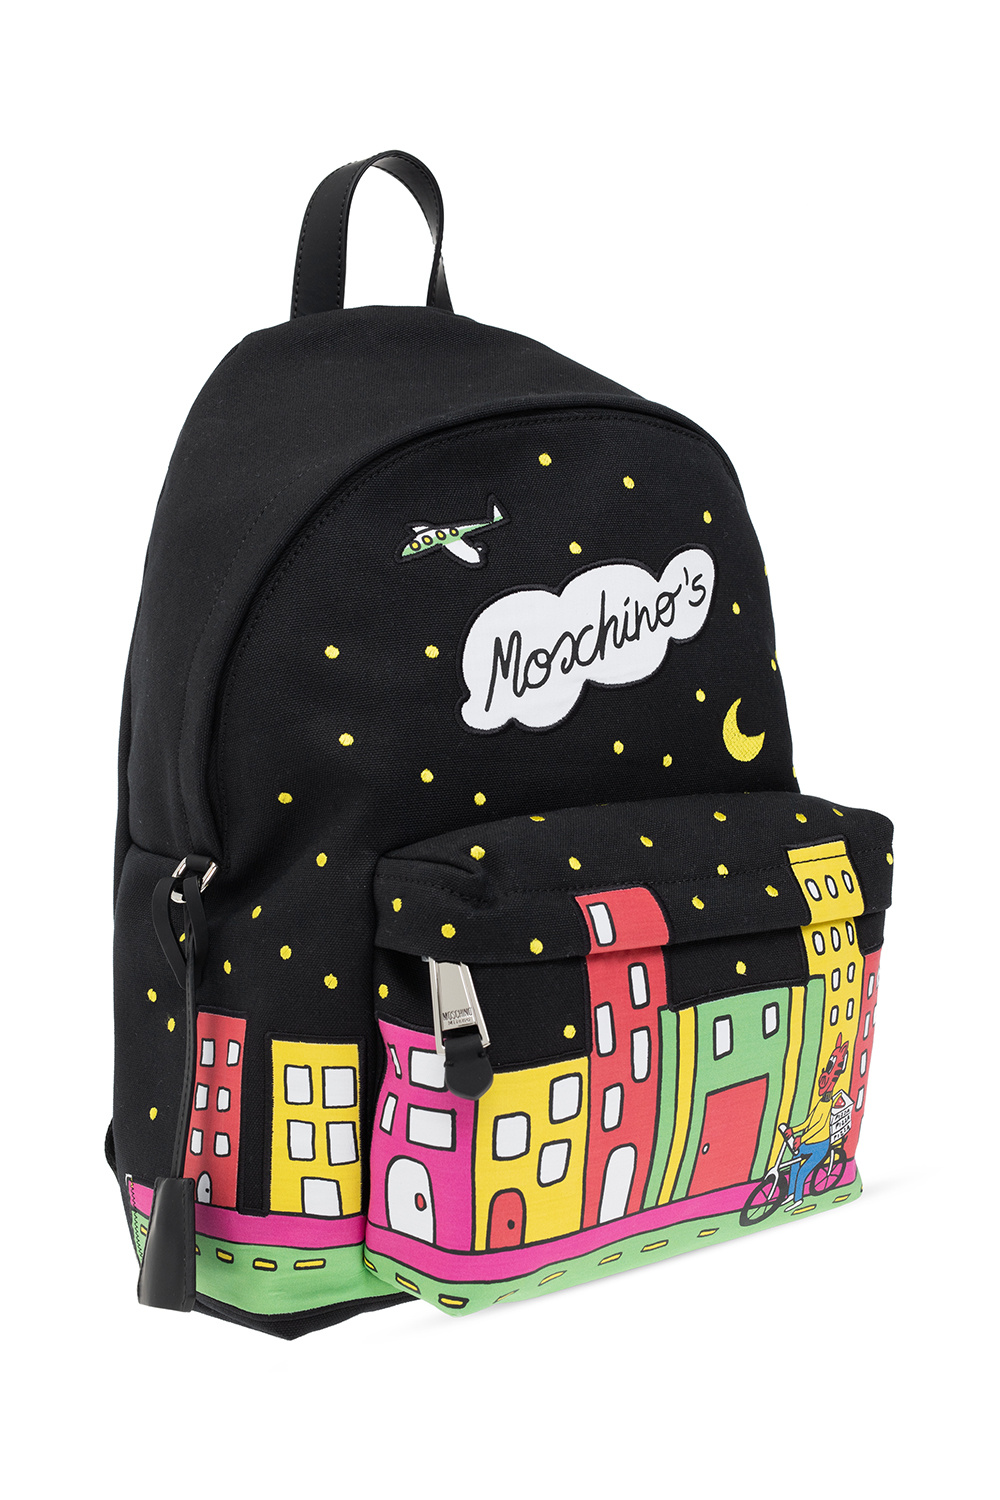 Moschino Medium backpack with patches